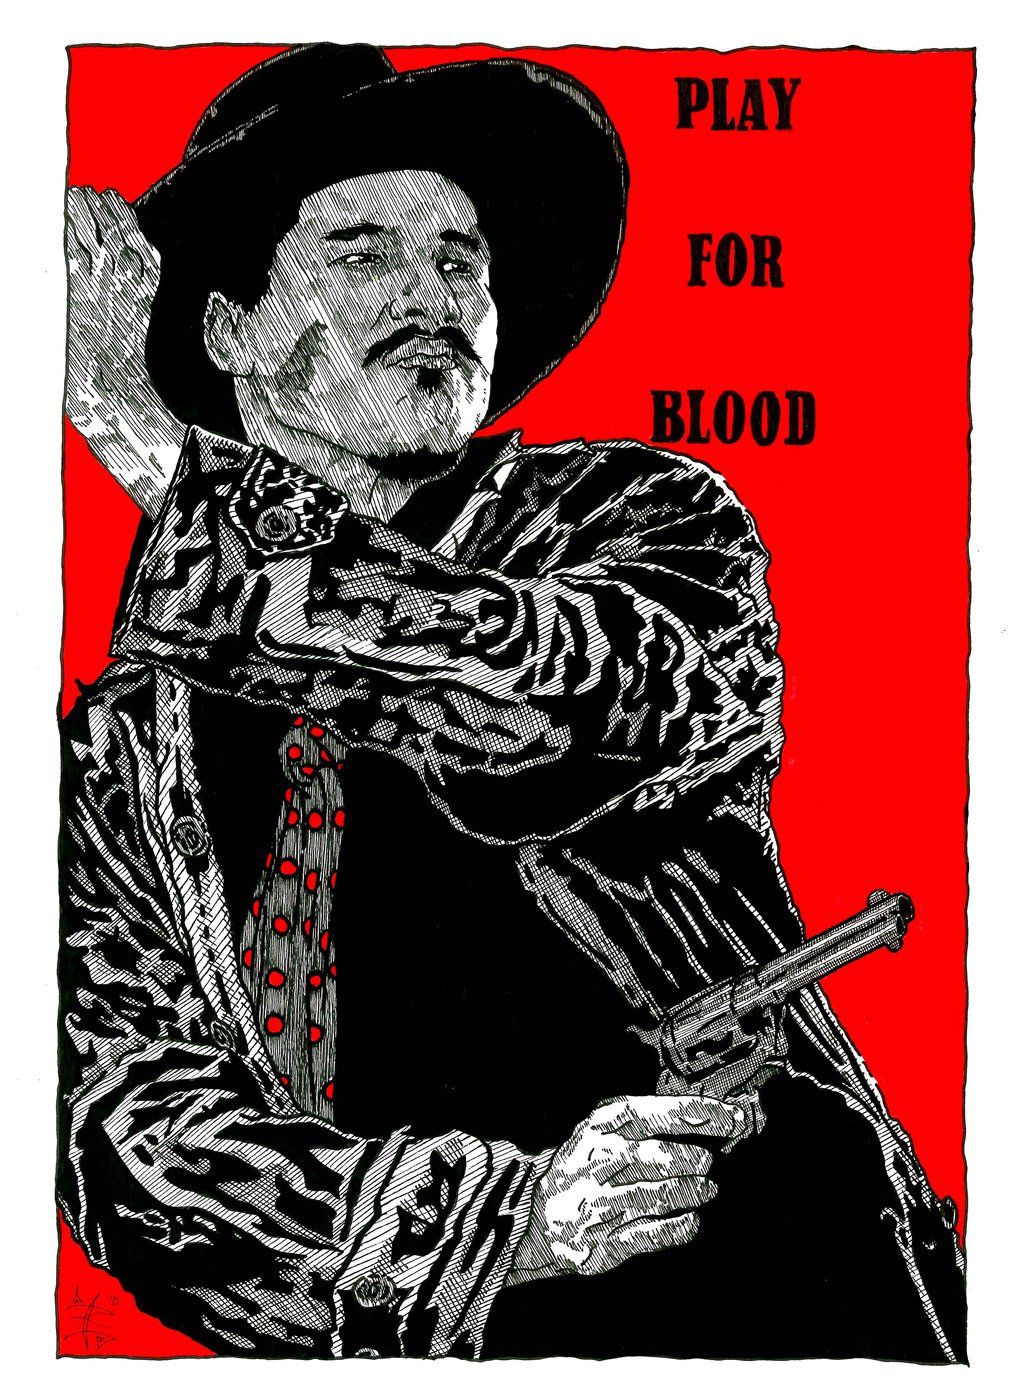 1 Sketch Today  Doc holliday Tombstone Doc holliday tombstone